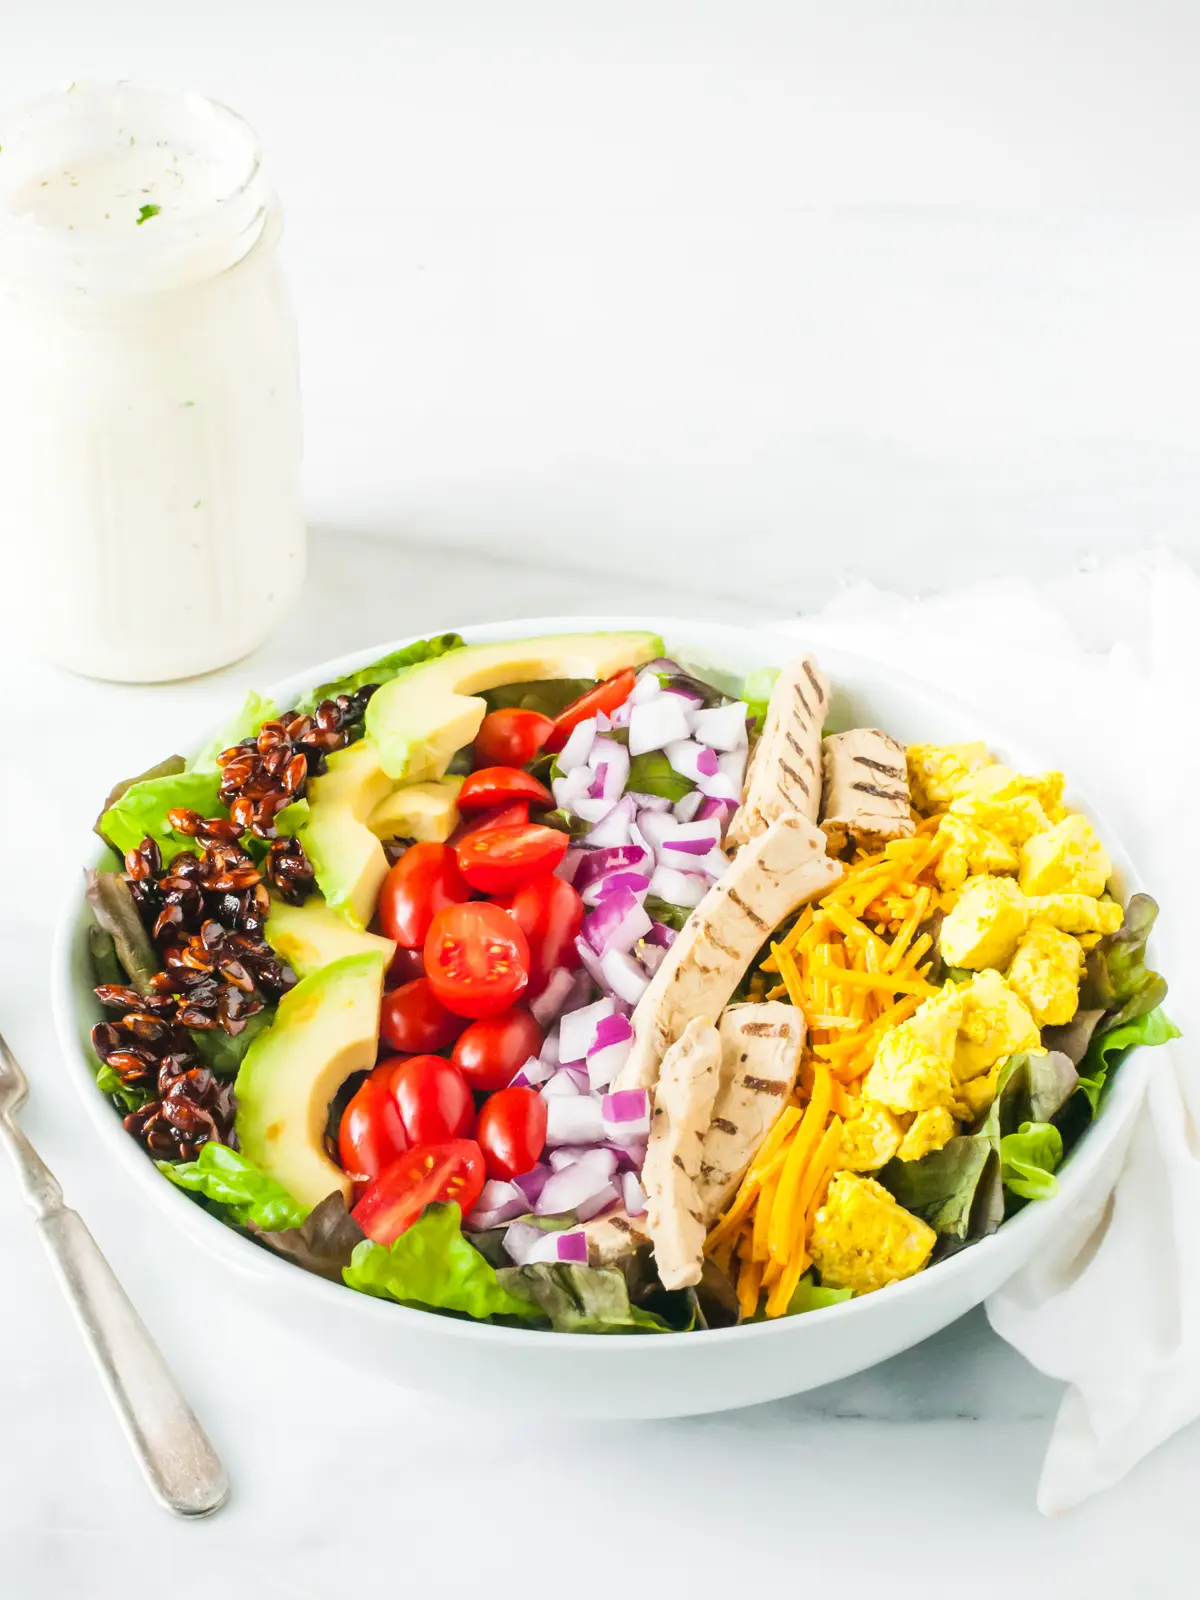 Vegan Cobb Salad in a white bowl with long strips of smoky almond slivers, sliced avocados, vegan cheese, and other toppings. A bottle of vegan ranch dressing is in the background.